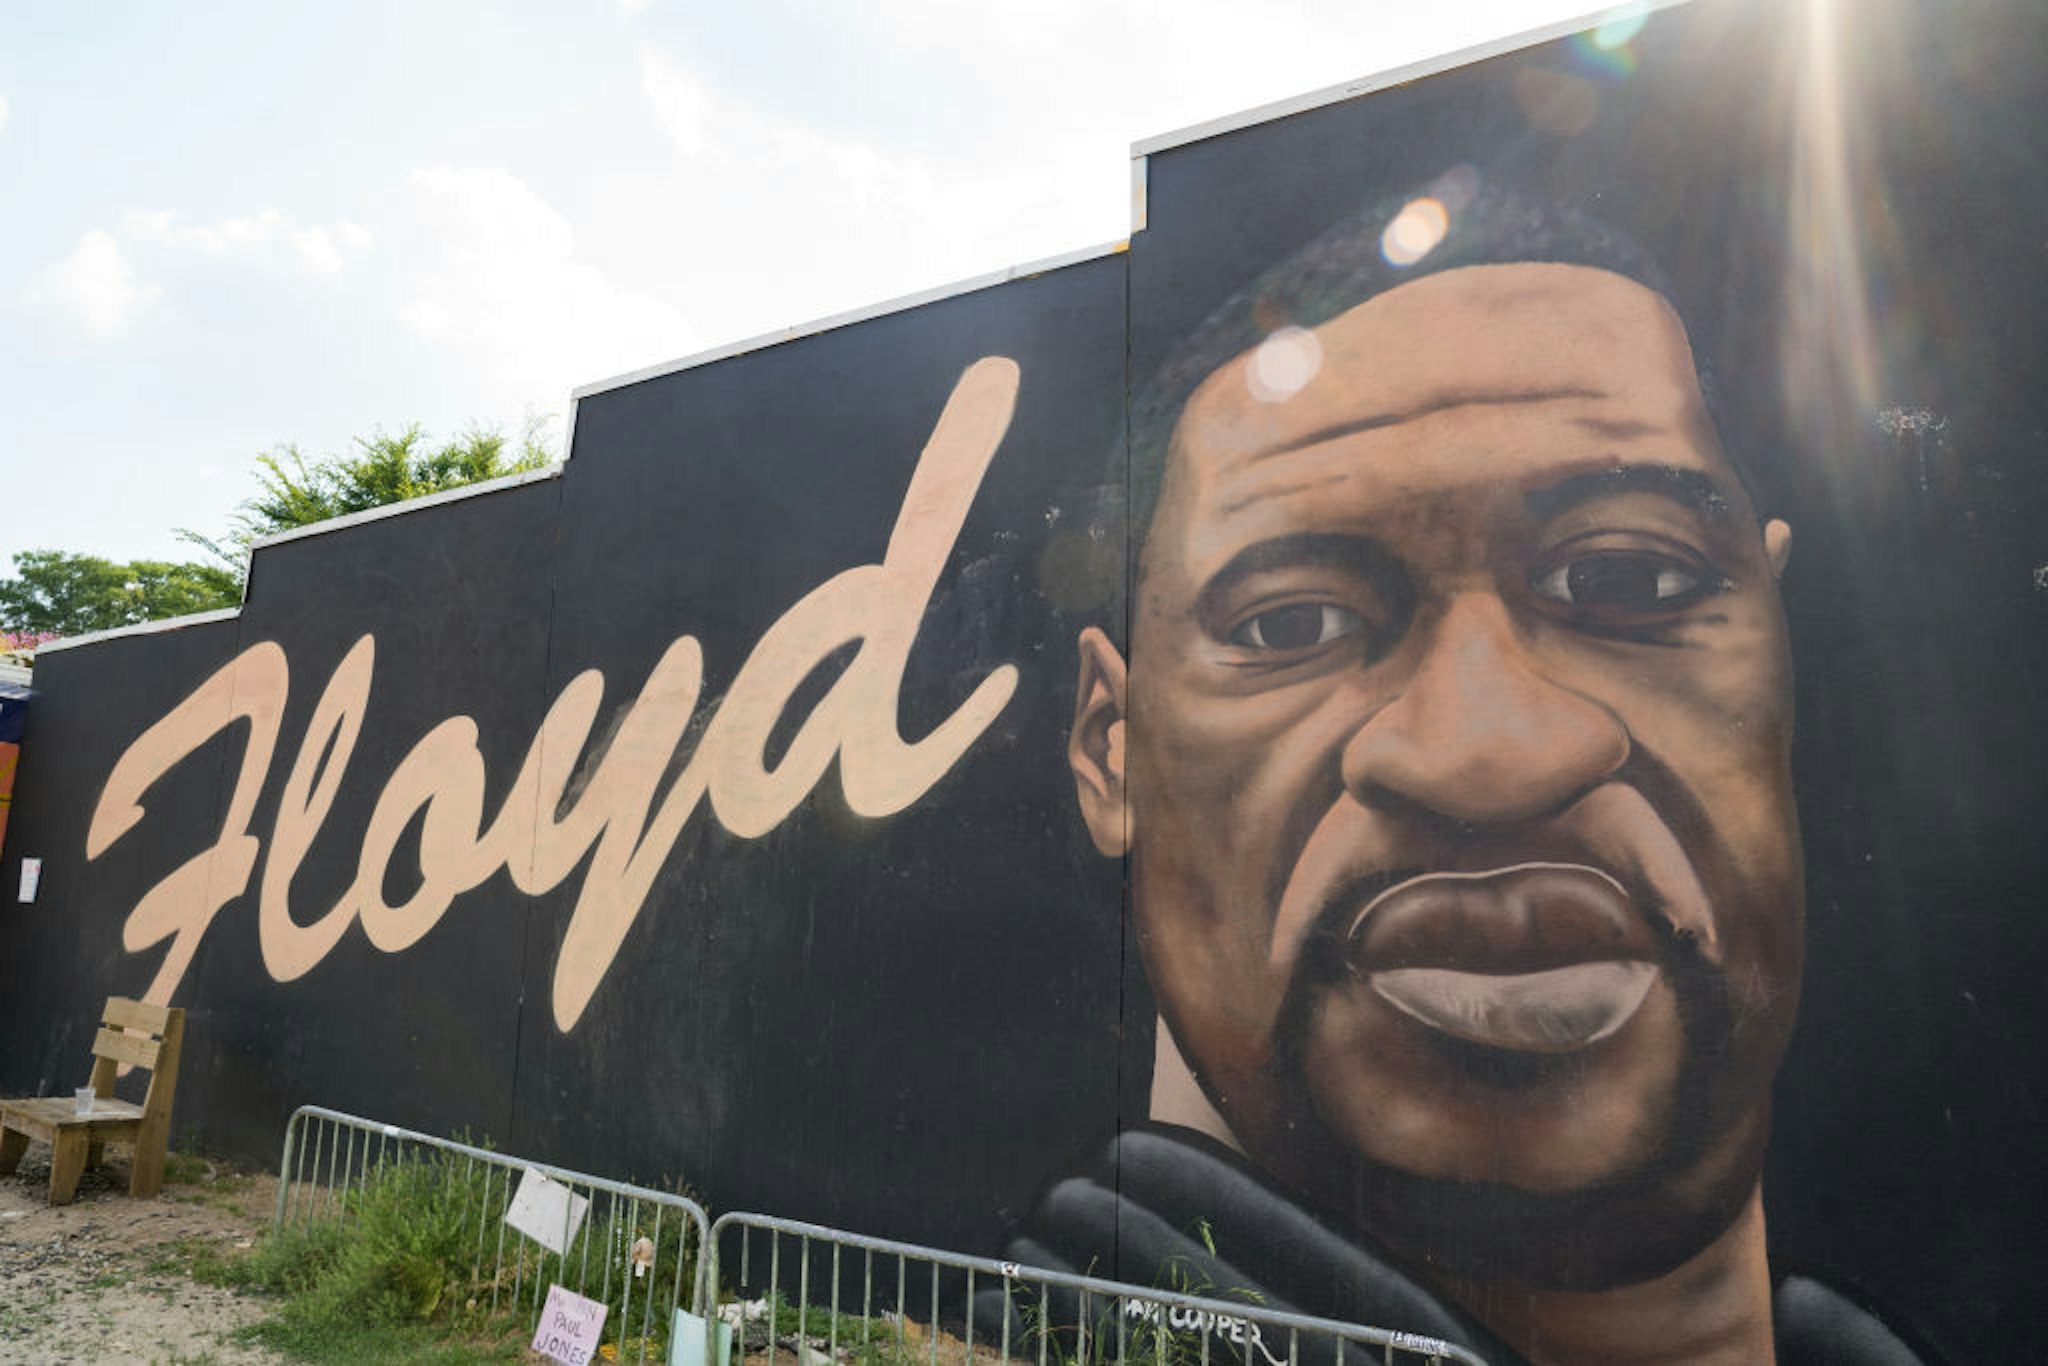 ATLANTA, GA - MAY 25: A mural of George Floyd painted downtown to memorialize the life of George Floyd is shown on the anniversary of his death on May 25, 2021 in Atlanta, Georgia. Floyd's death at the hands of Minneapolis police officer Derek Chauvin sparked protests and movements around the world. (Photo by Megan Varner/Getty Images)